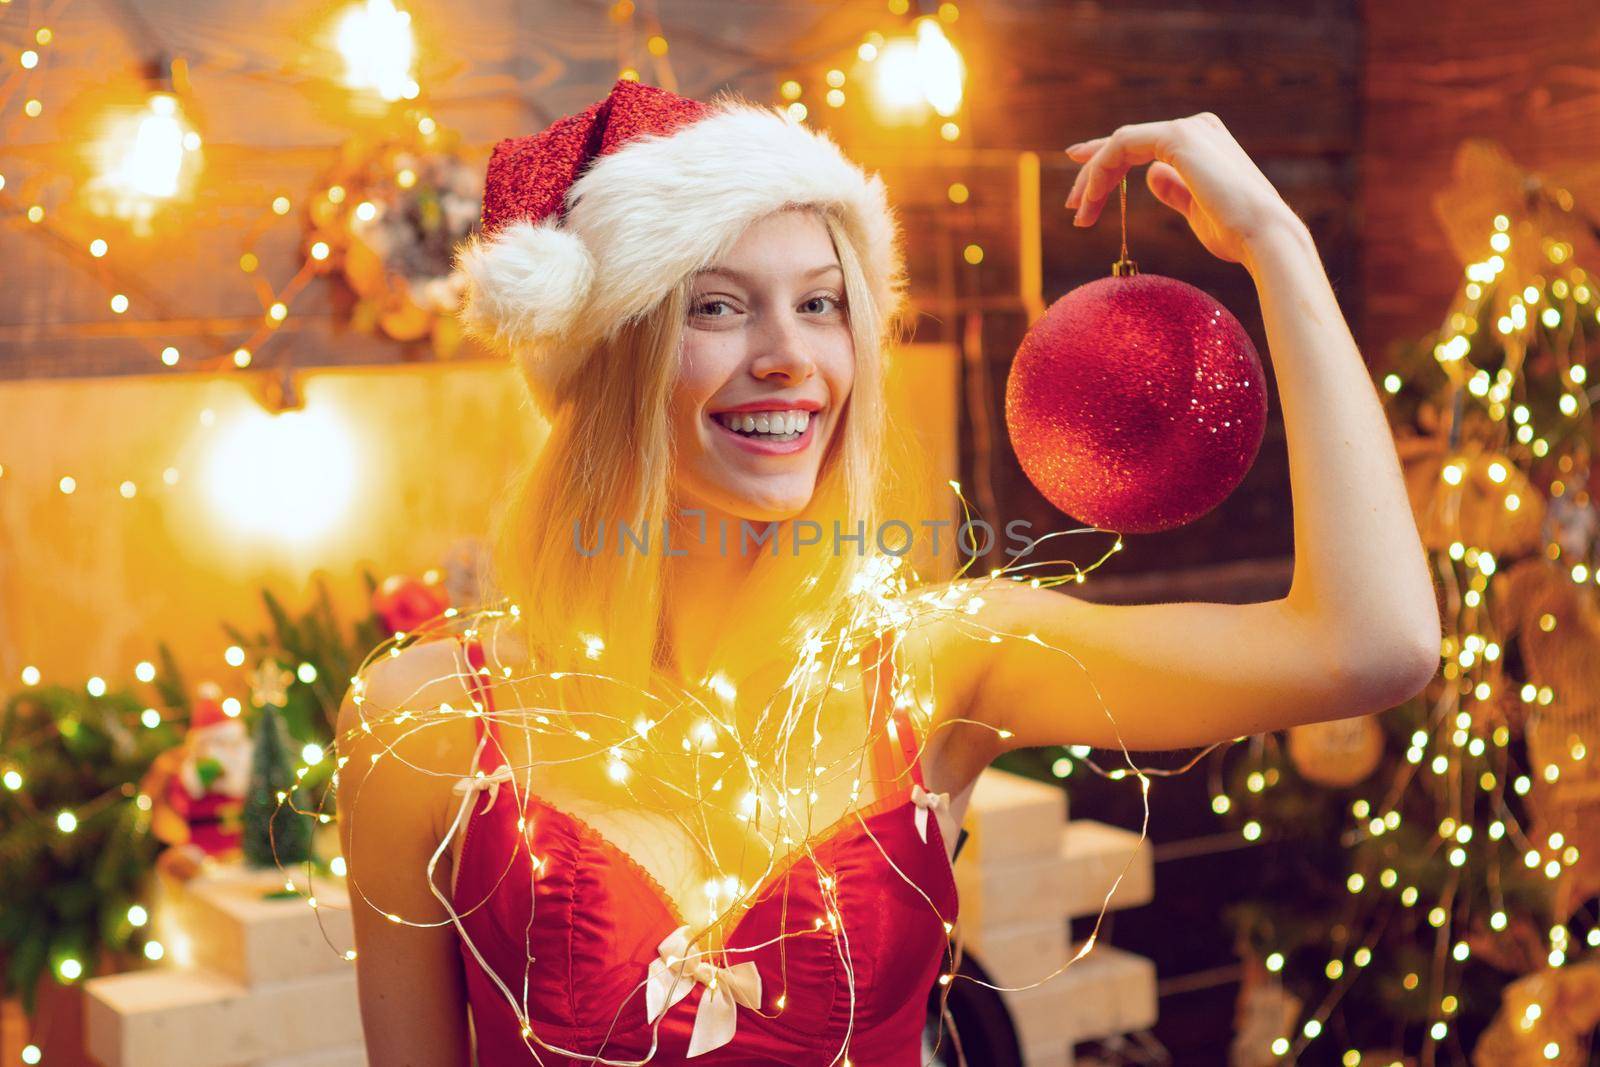 Smiling woman with red lips in christmas light is looking at camera. Girl is wearing Santa hat. Concept of holidays